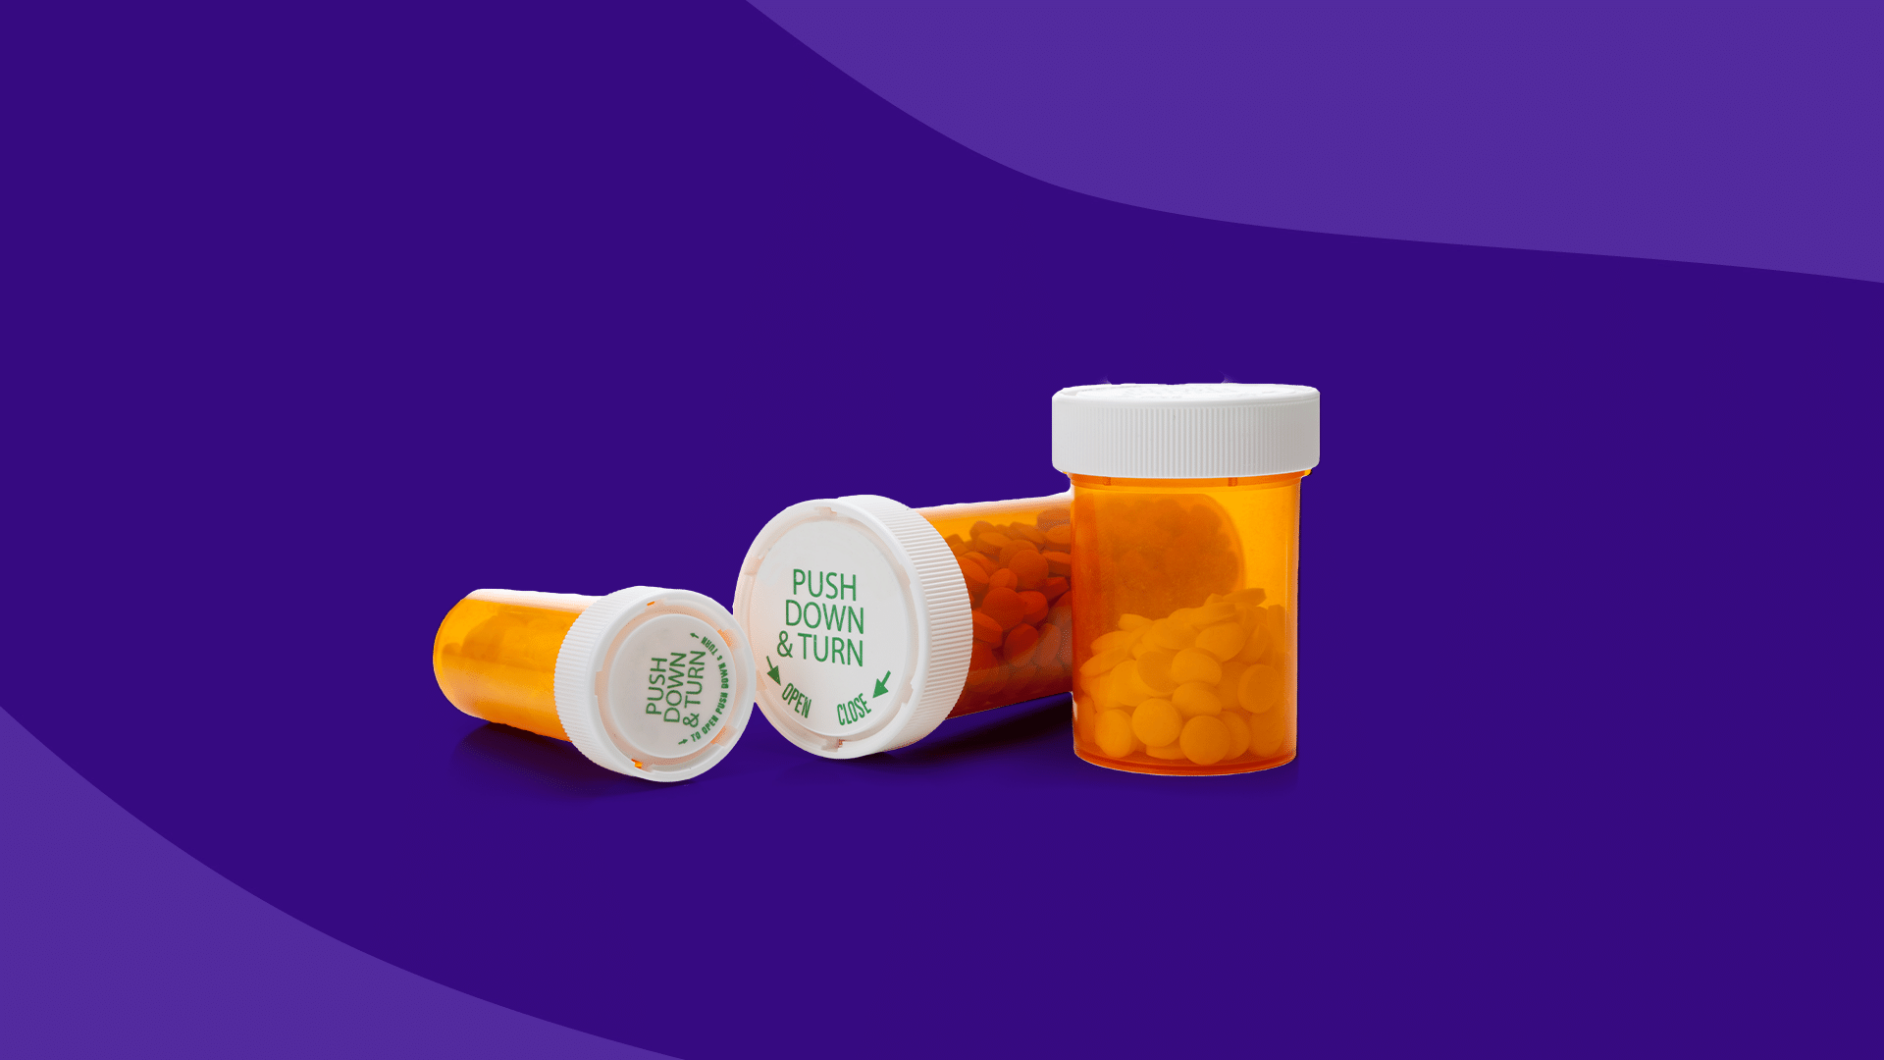 Three Rx pill bottles: Carvedilol interactions to avoid